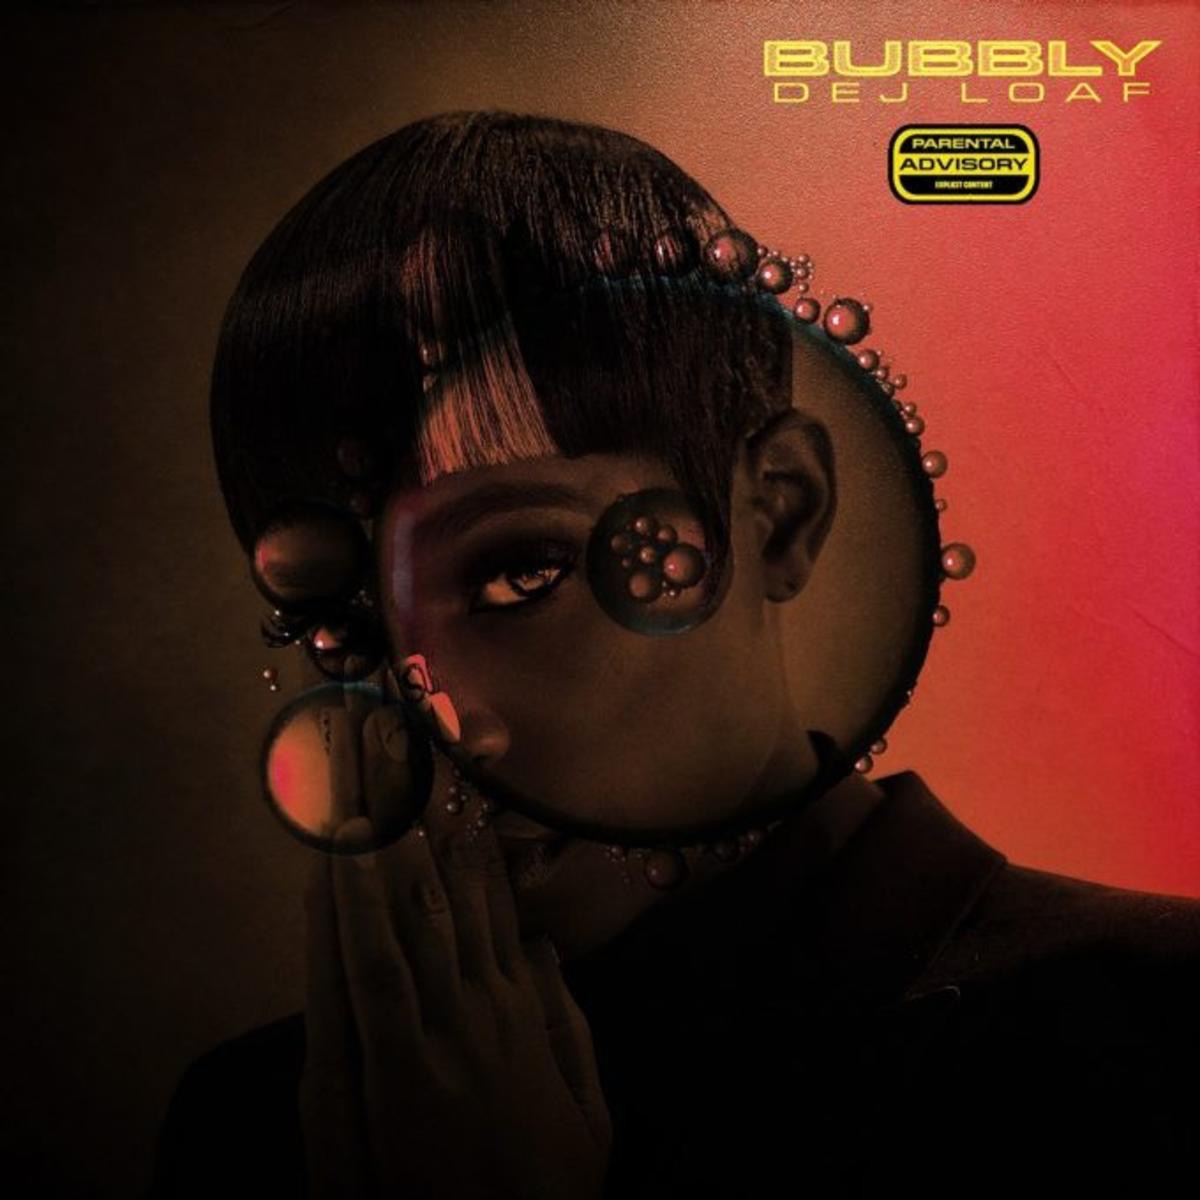 Art for Bubbly (Radio) by Dej Loaf